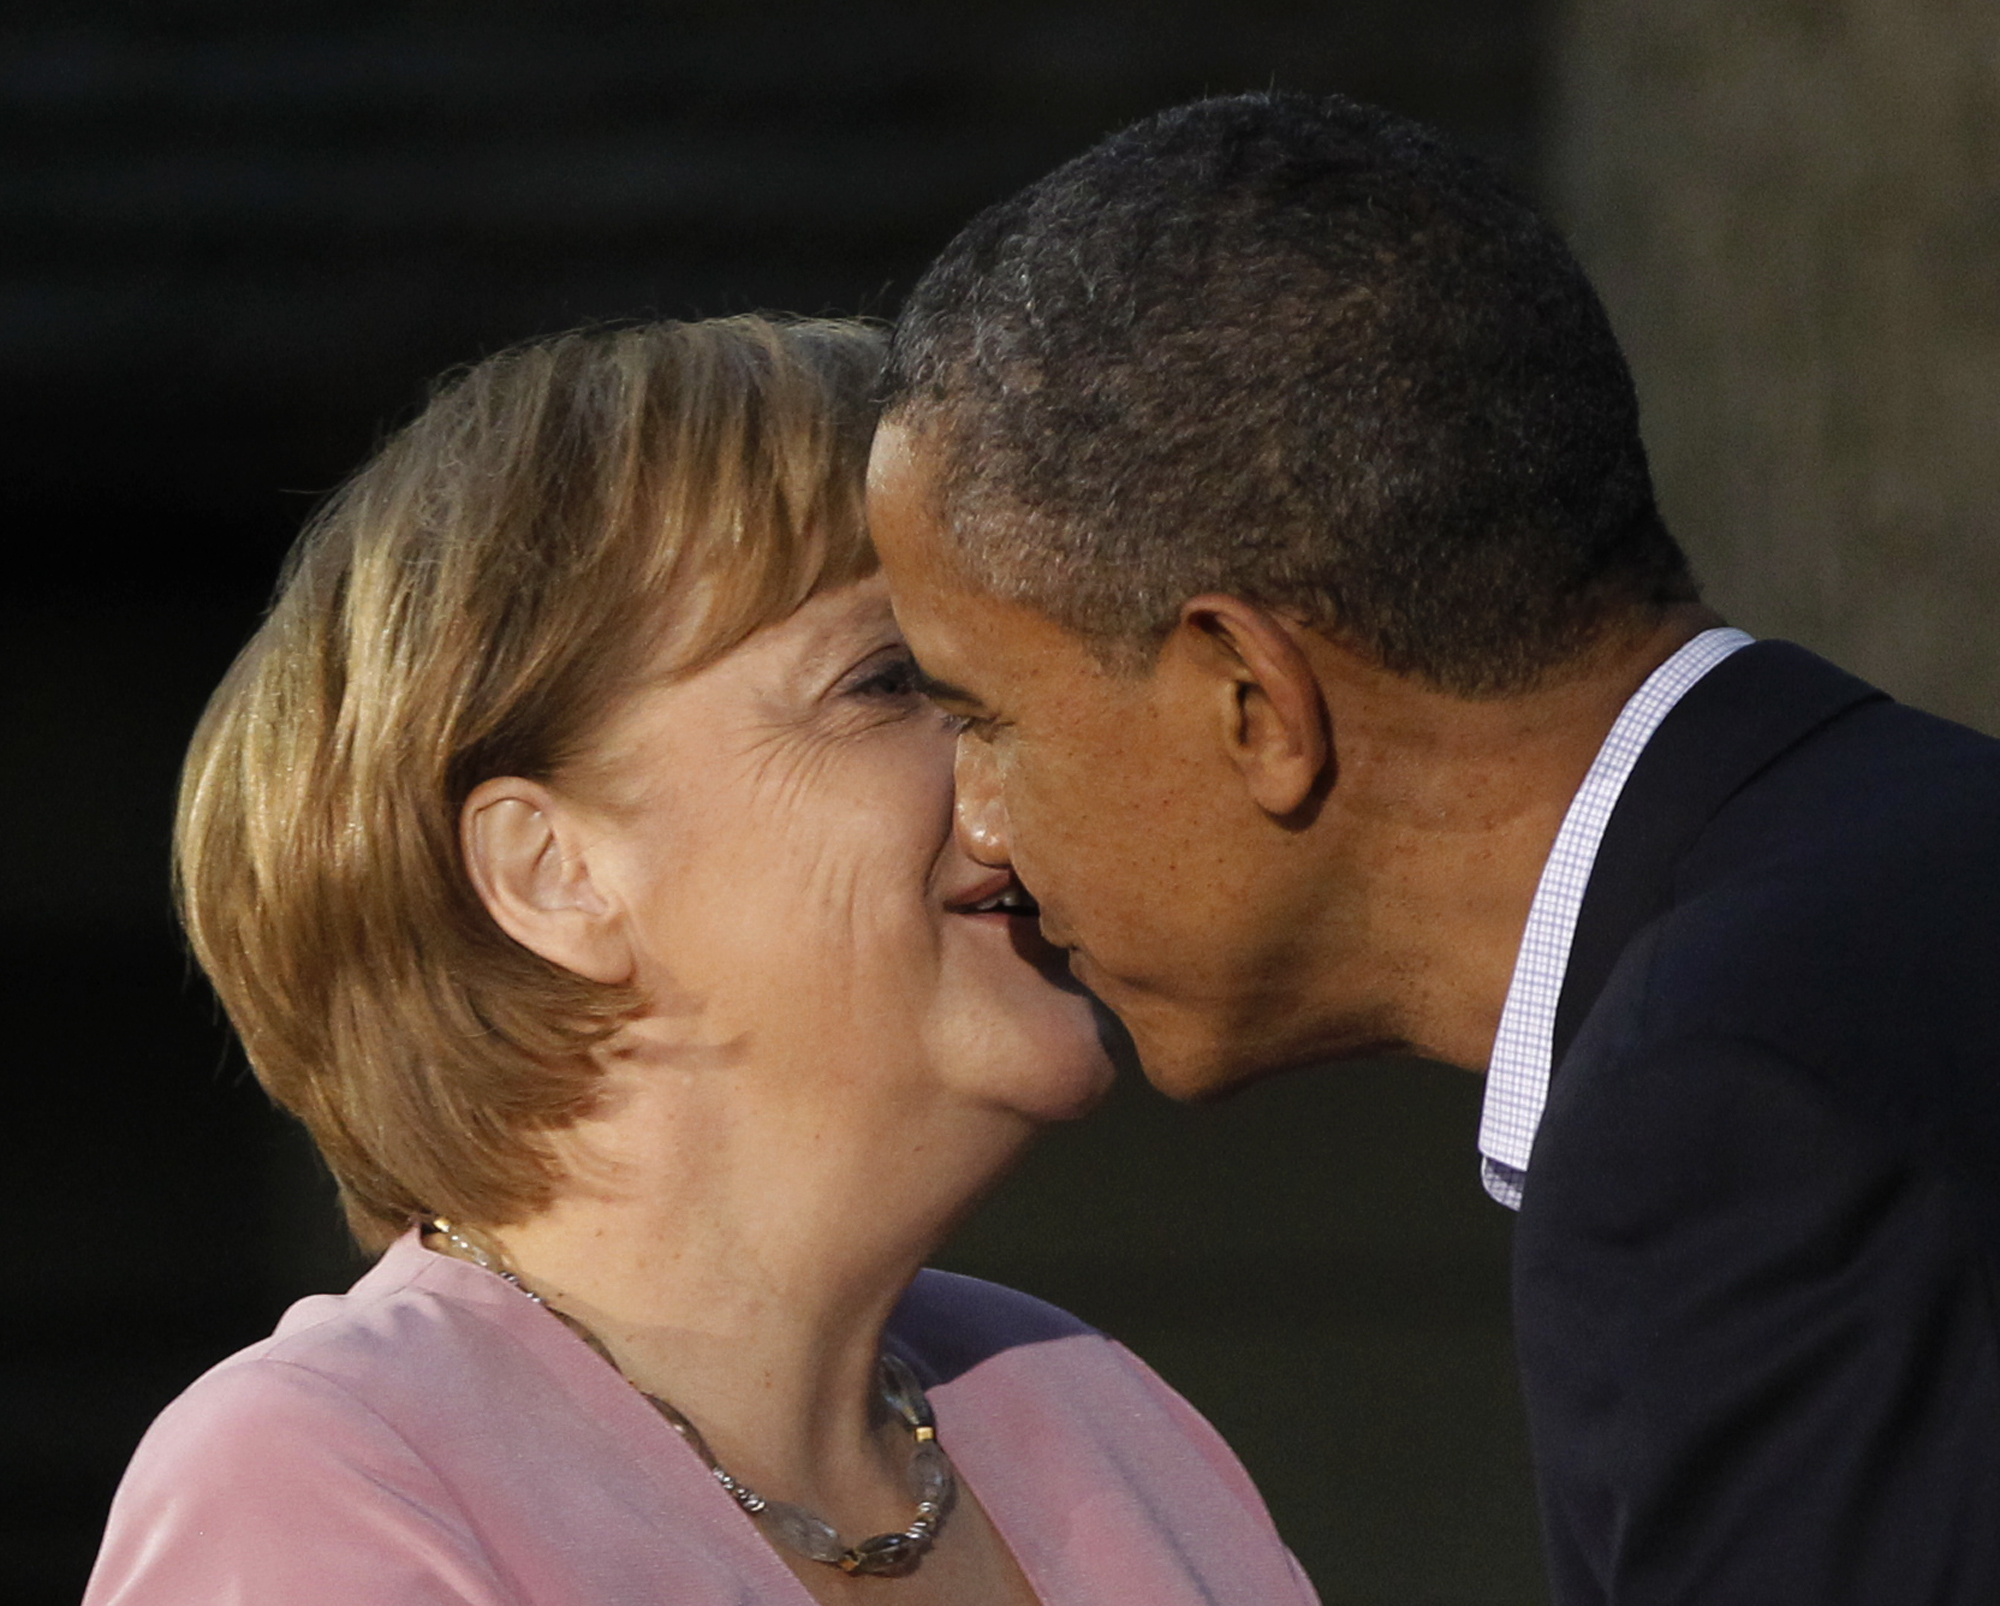 President Barack Obama gives German Chancellor Angela Merkel a kiss on the cheek on arrival for the G8 Summit on May 18, 2012 at Camp David, Md.